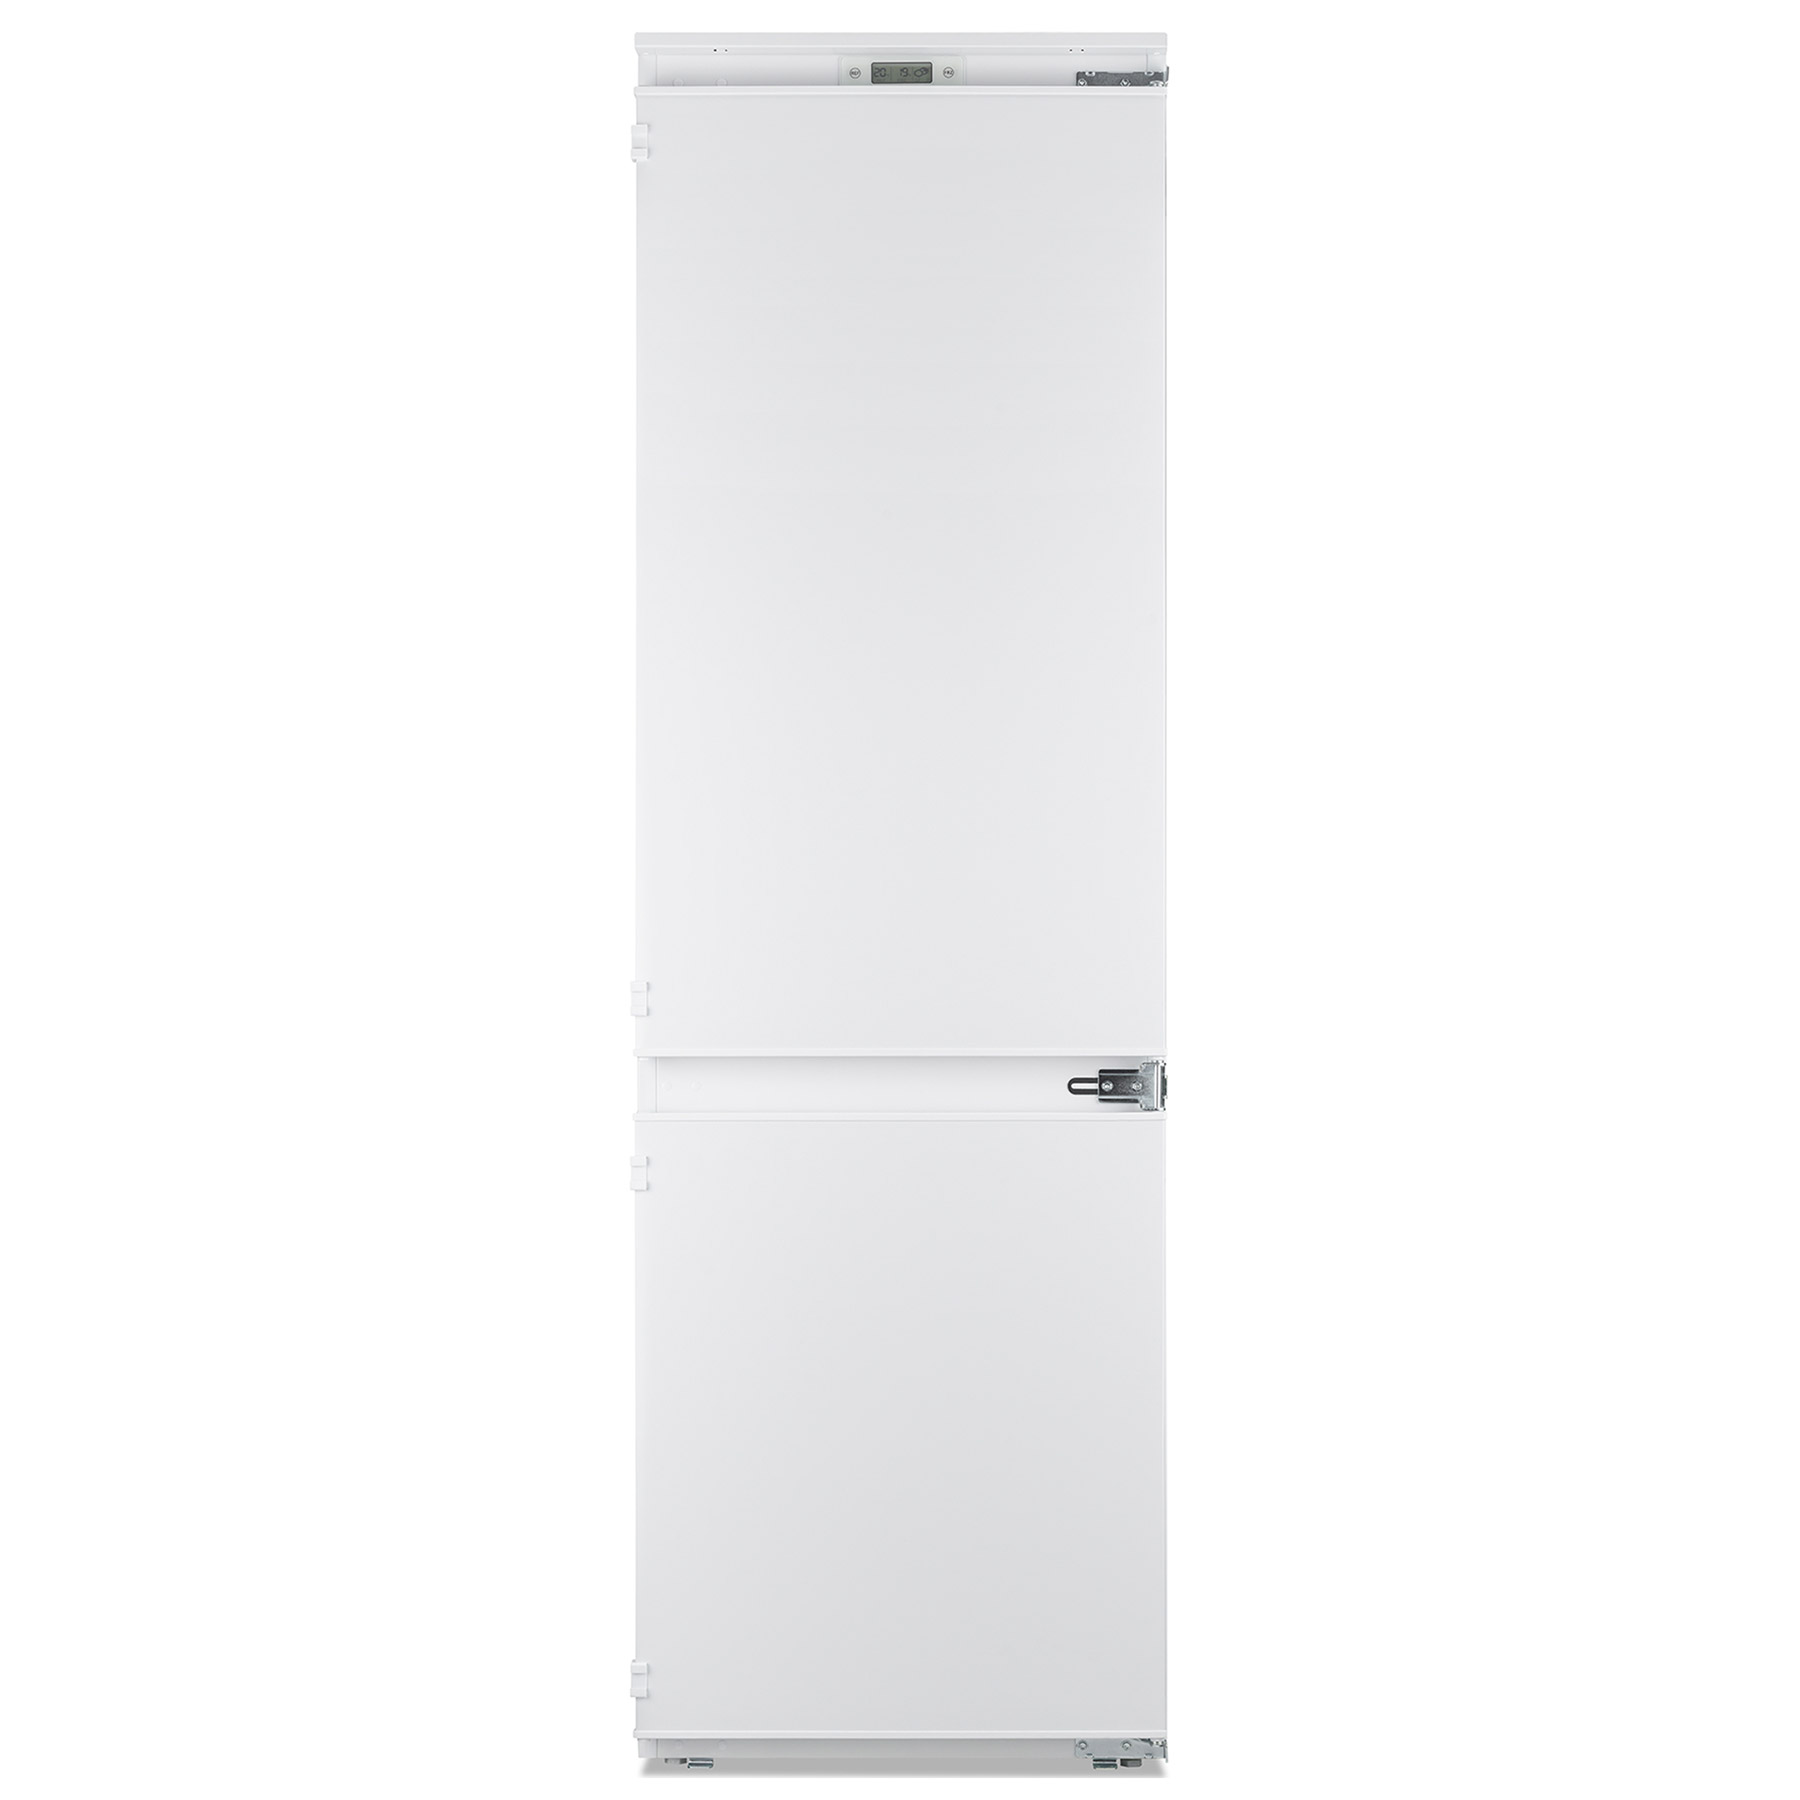 Image of Montpellier MIFF702 Integrated Fridge Freezer 70 30 1 77m F Rated